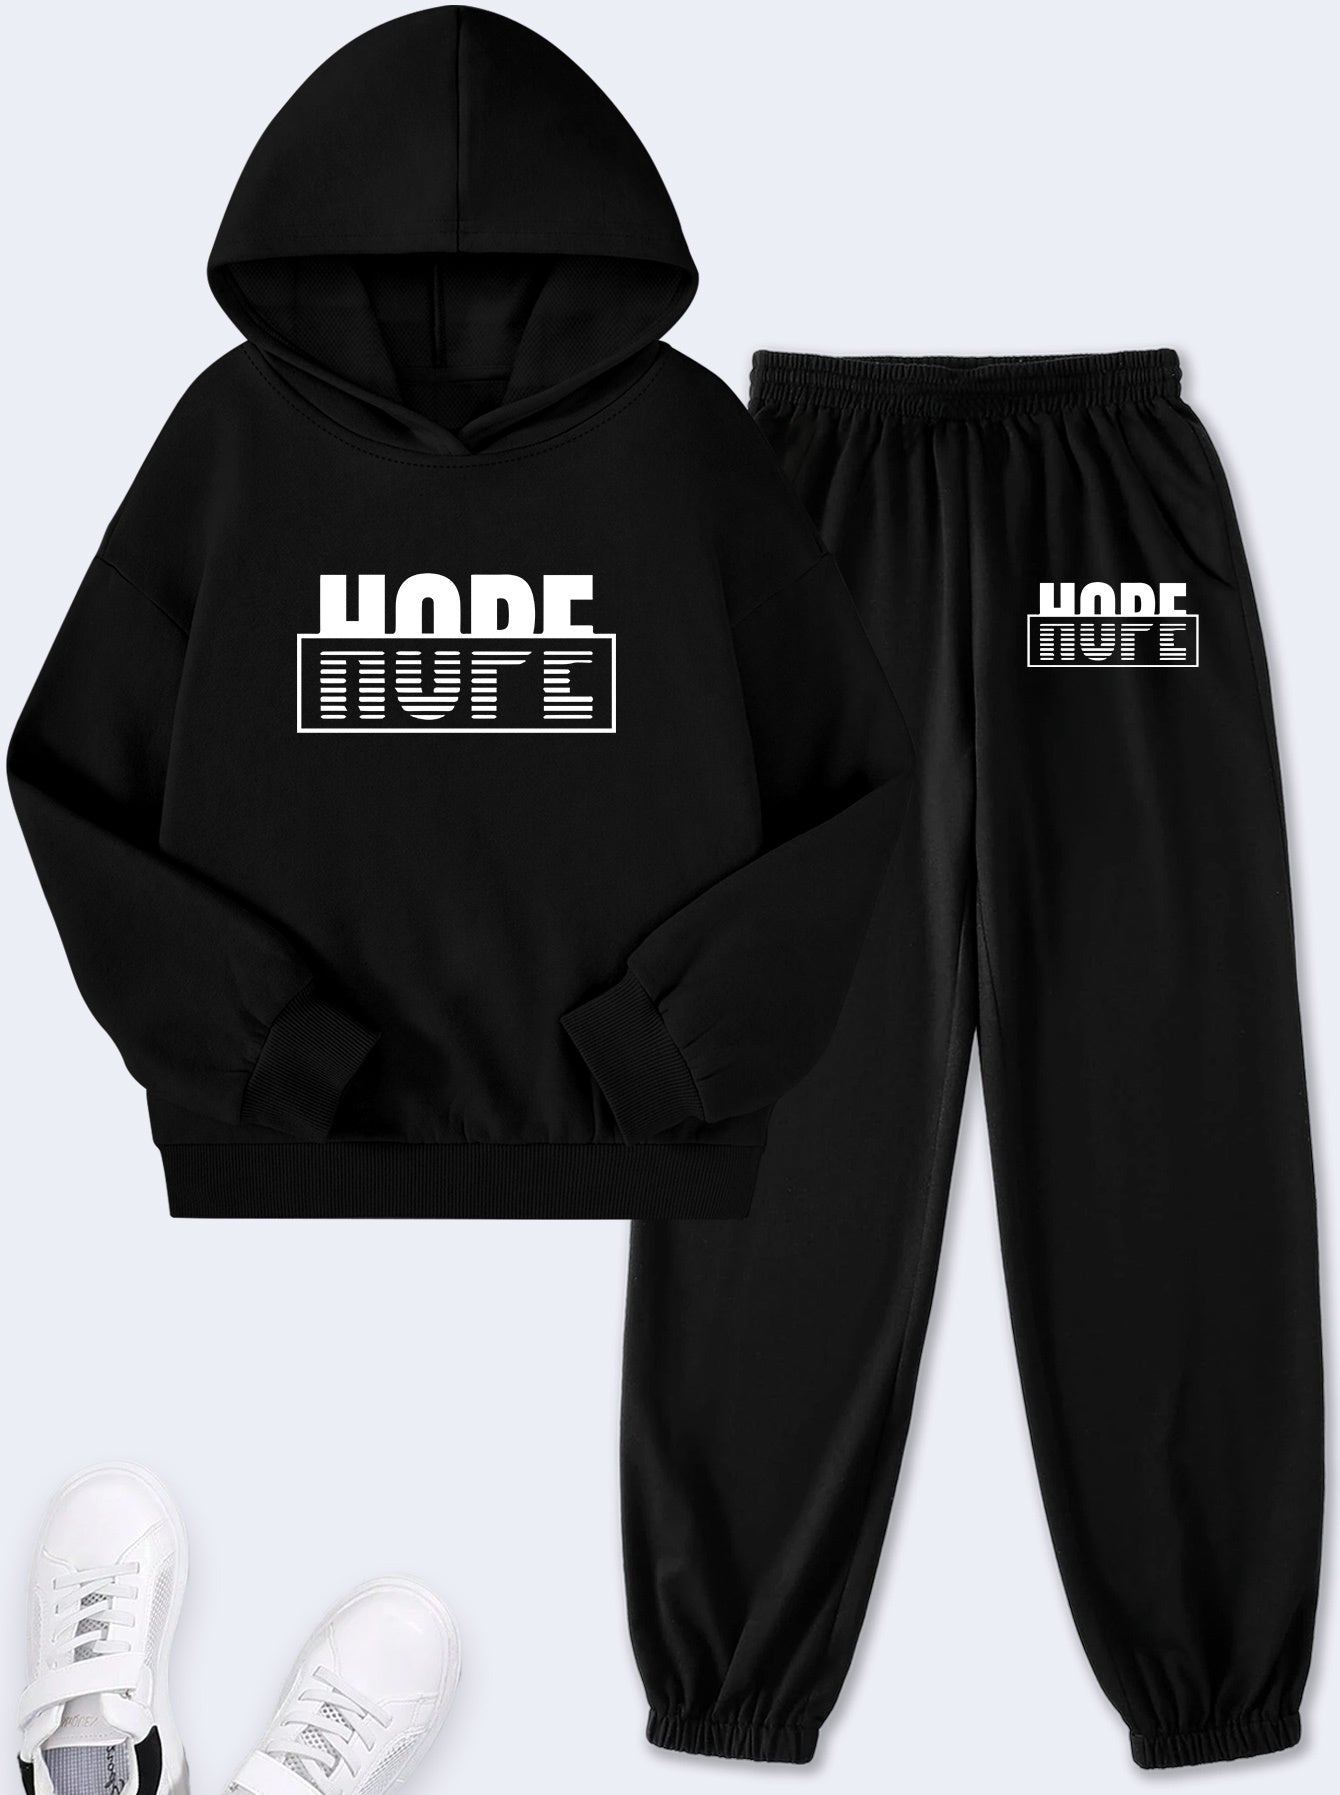 Hope Youth Christian Casual Outfit claimedbygoddesigns